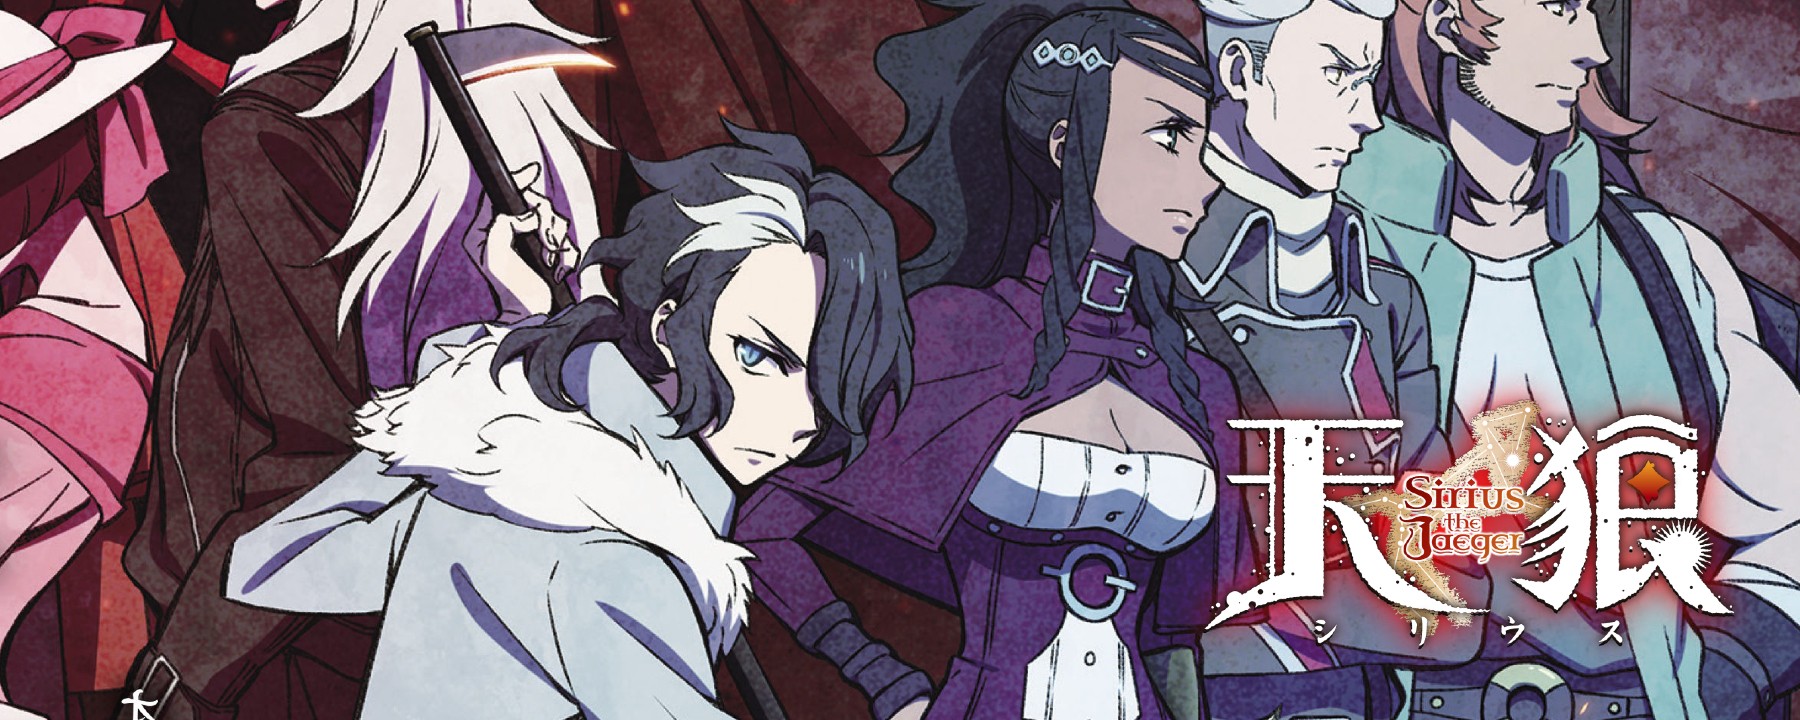 Anime Review: Sirius the Jaeger – (Mis)Adventures in Anime